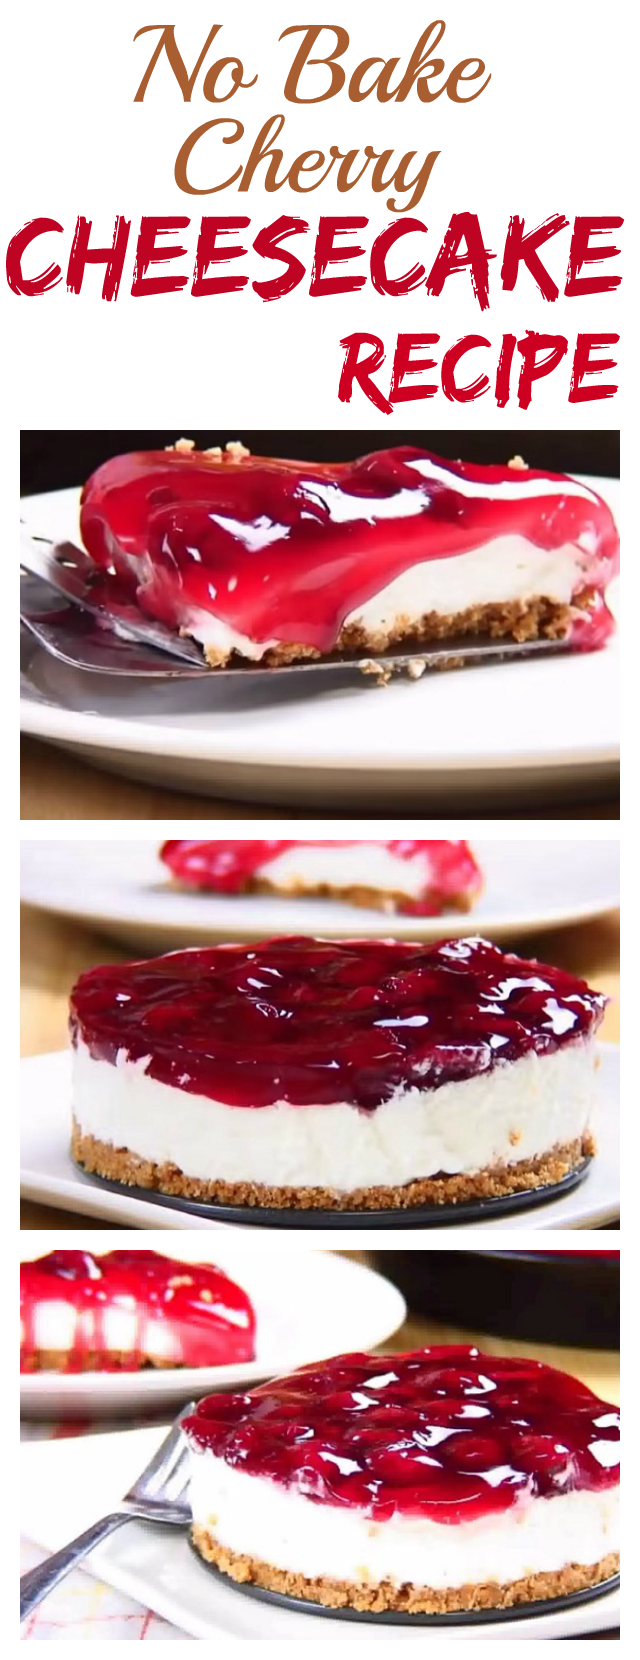 The simplest and best no bake cherry cheesecake recipe